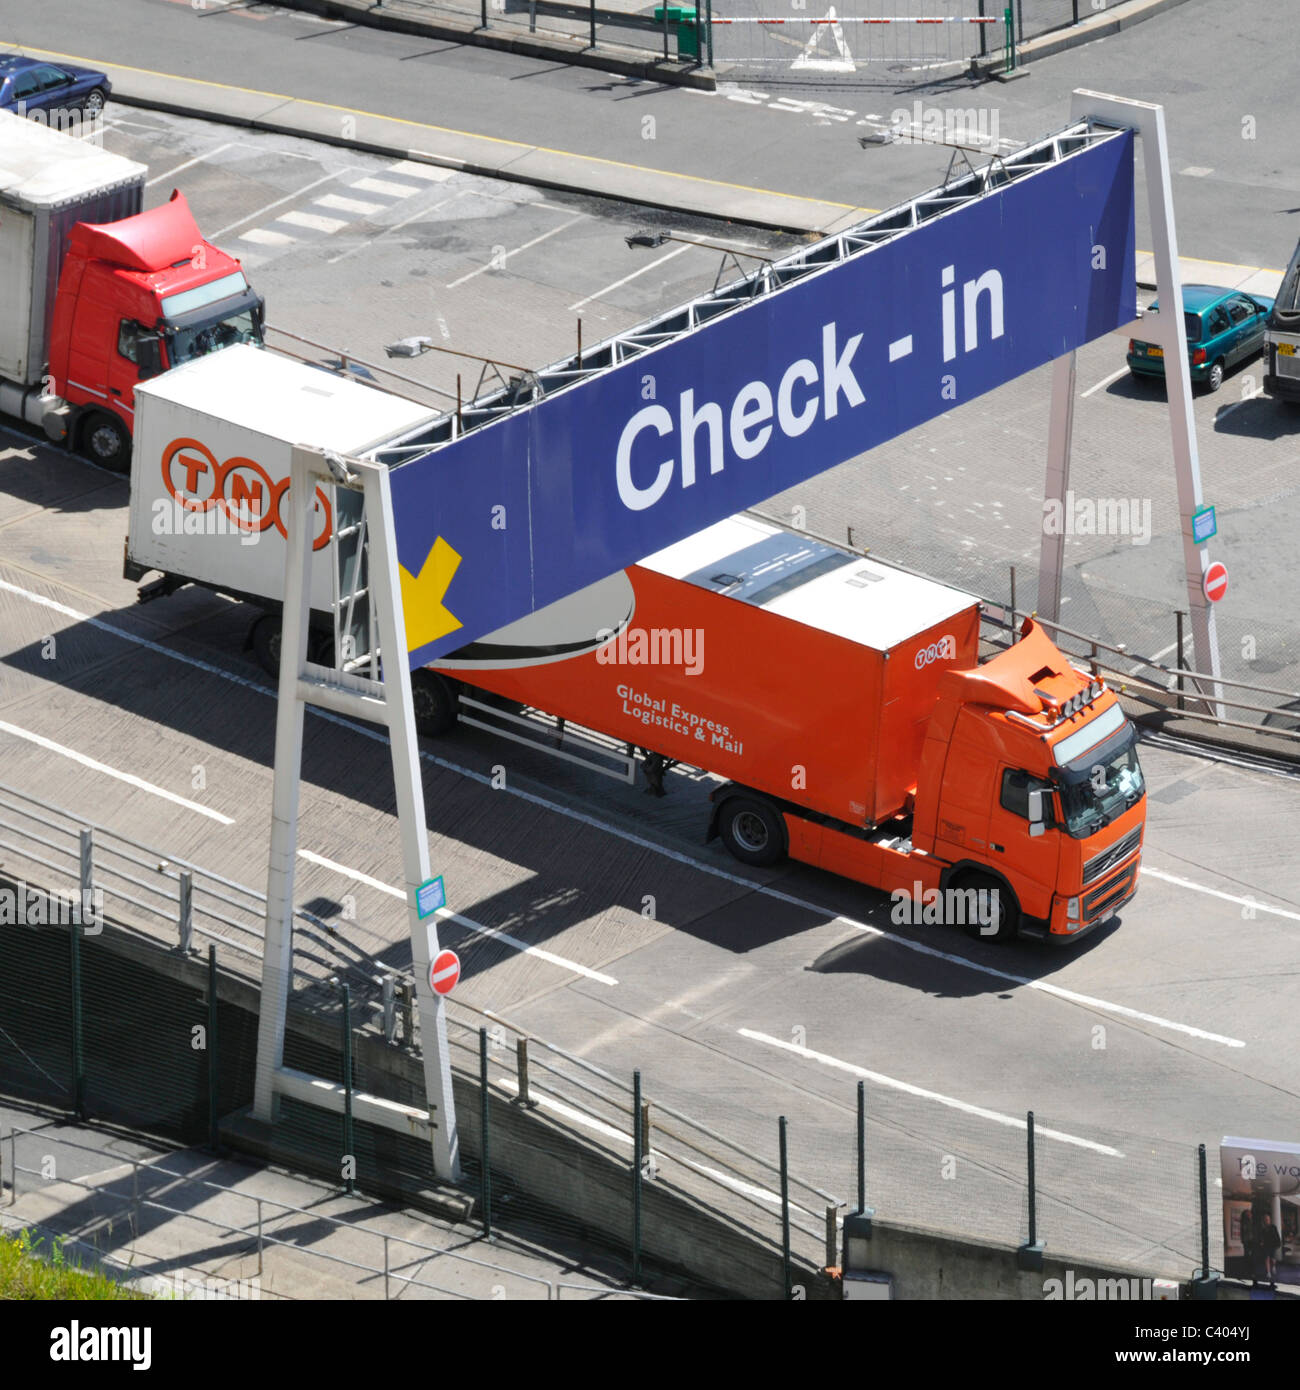 Aerial birds eye view looking down on TNT hgv lorry truck trailer vehicle leaving Dover ferry Port below check in lane gantry sign Kent England UK Stock Photo